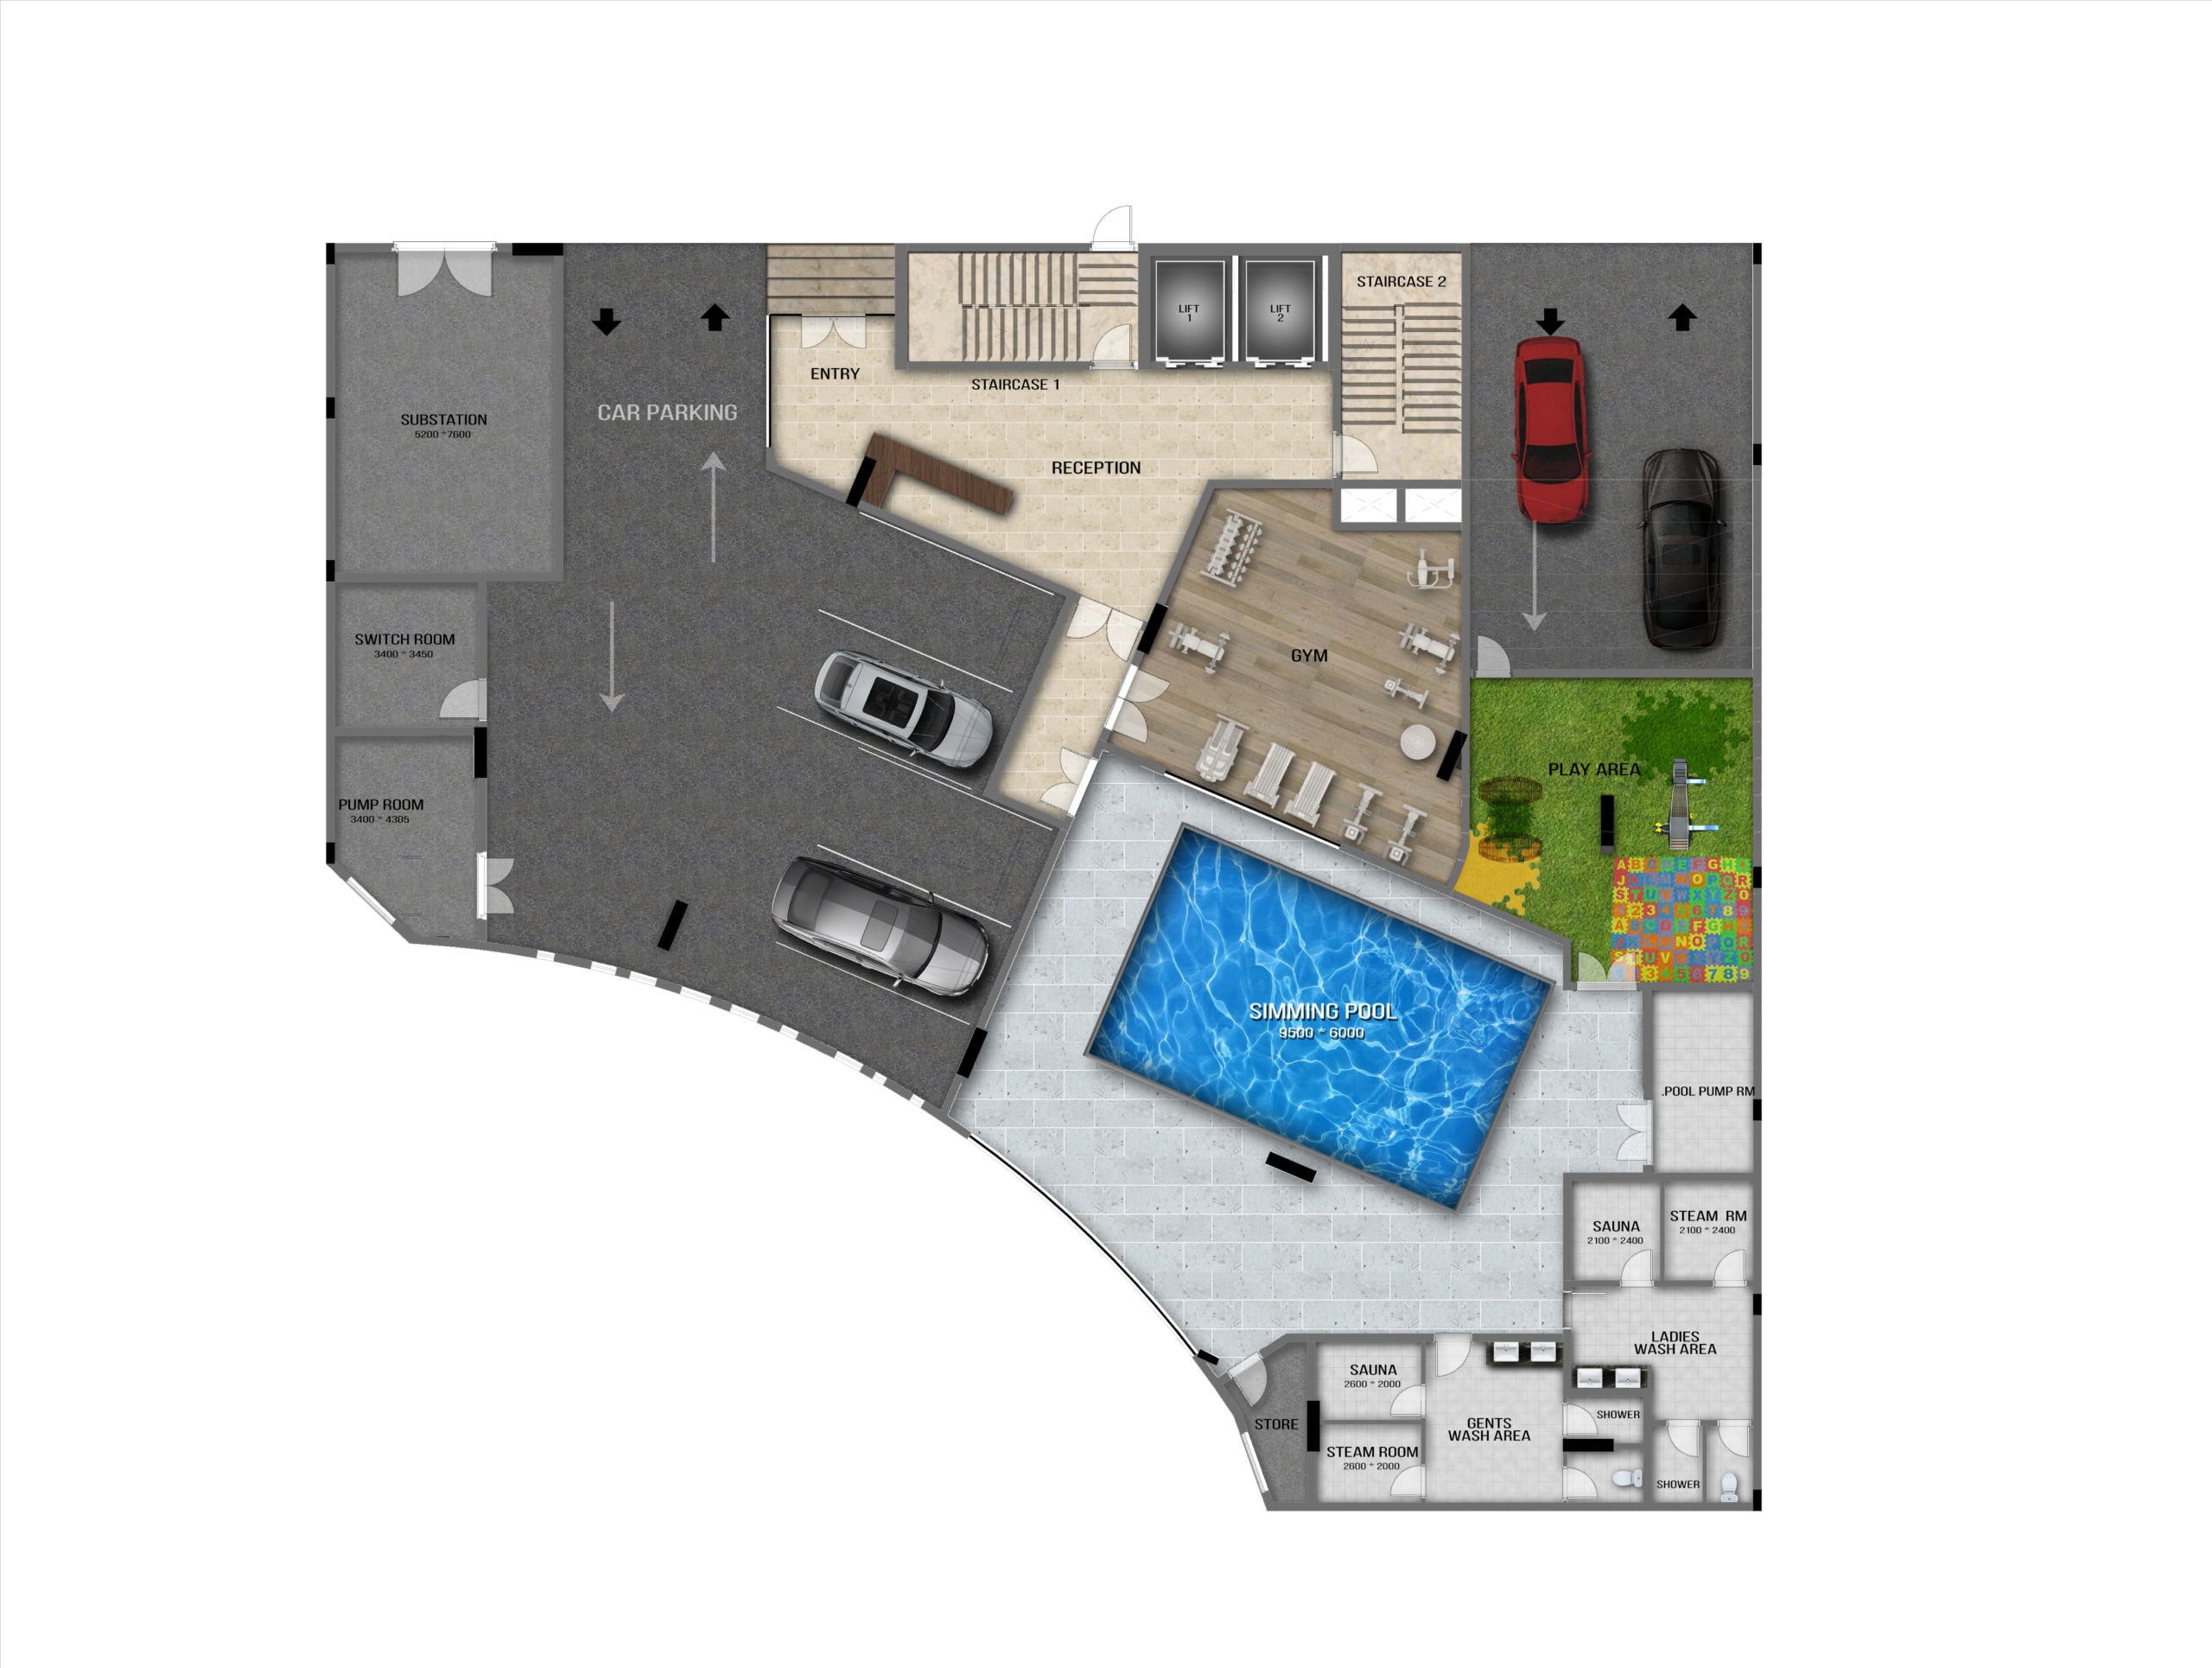 A Dar 2 apartment floor plan featuring a swimming pool.